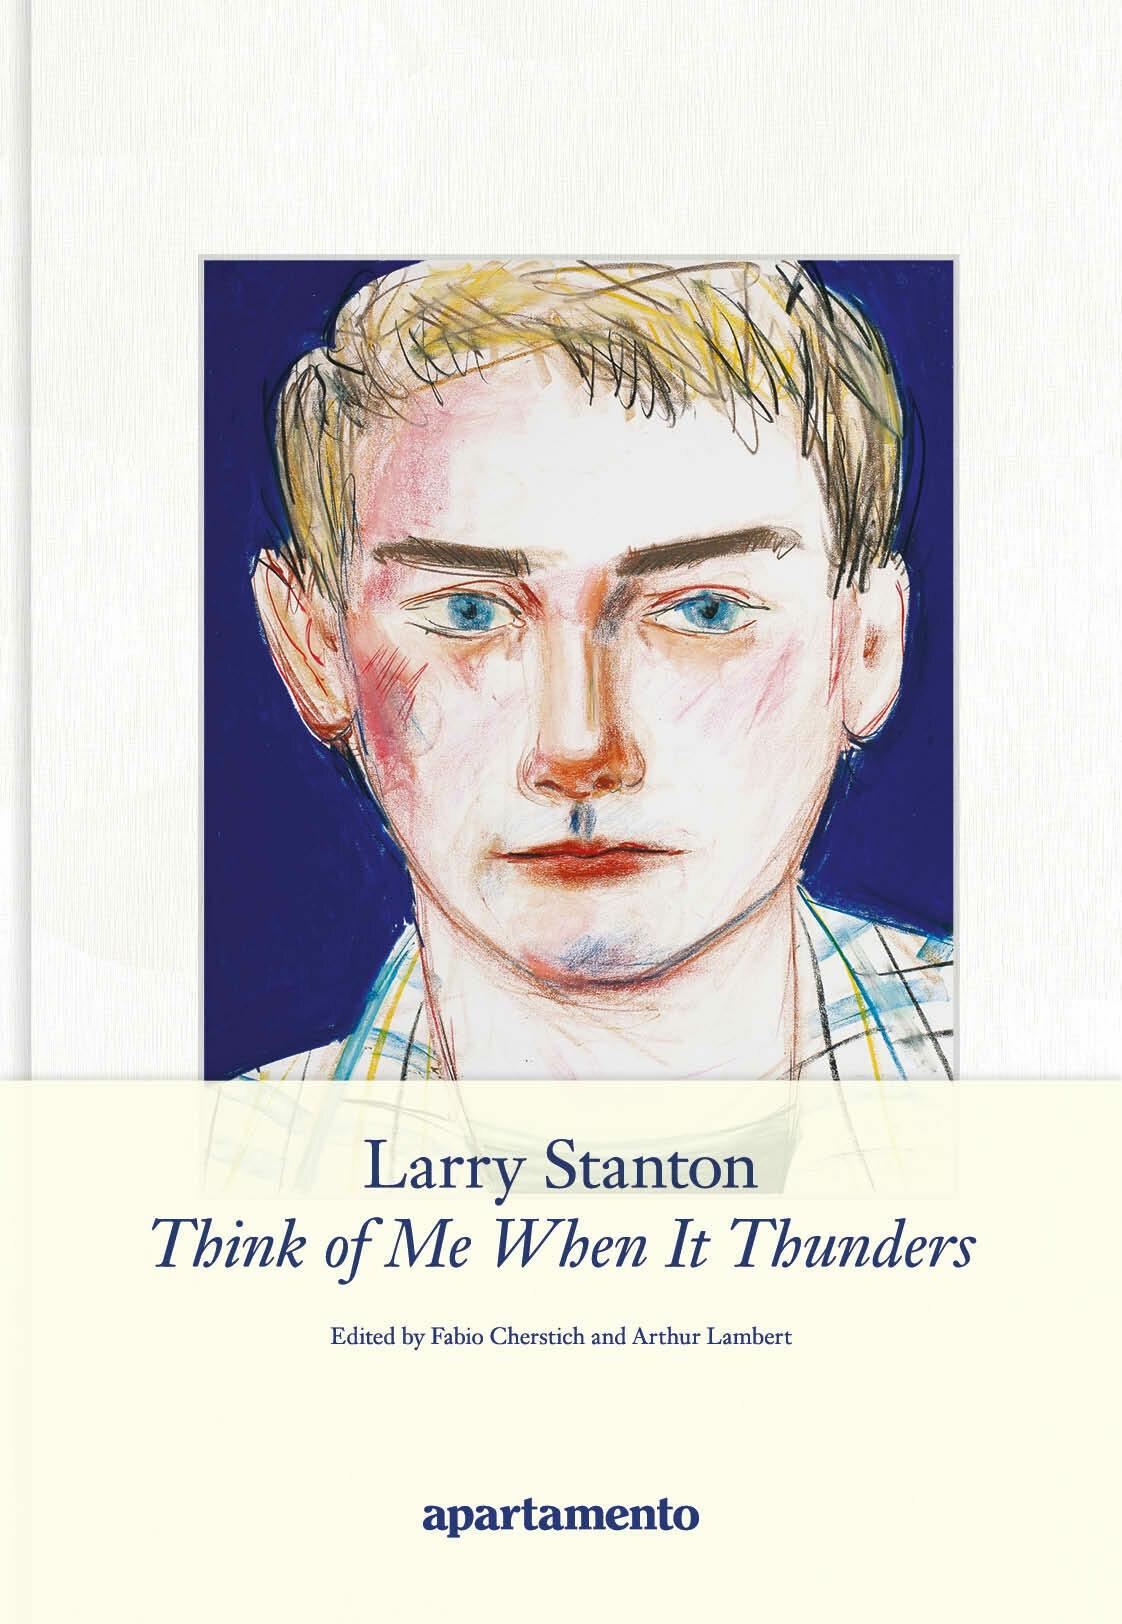 LARRY STANTON: THINK OF ME WHEN IT THUNDERS